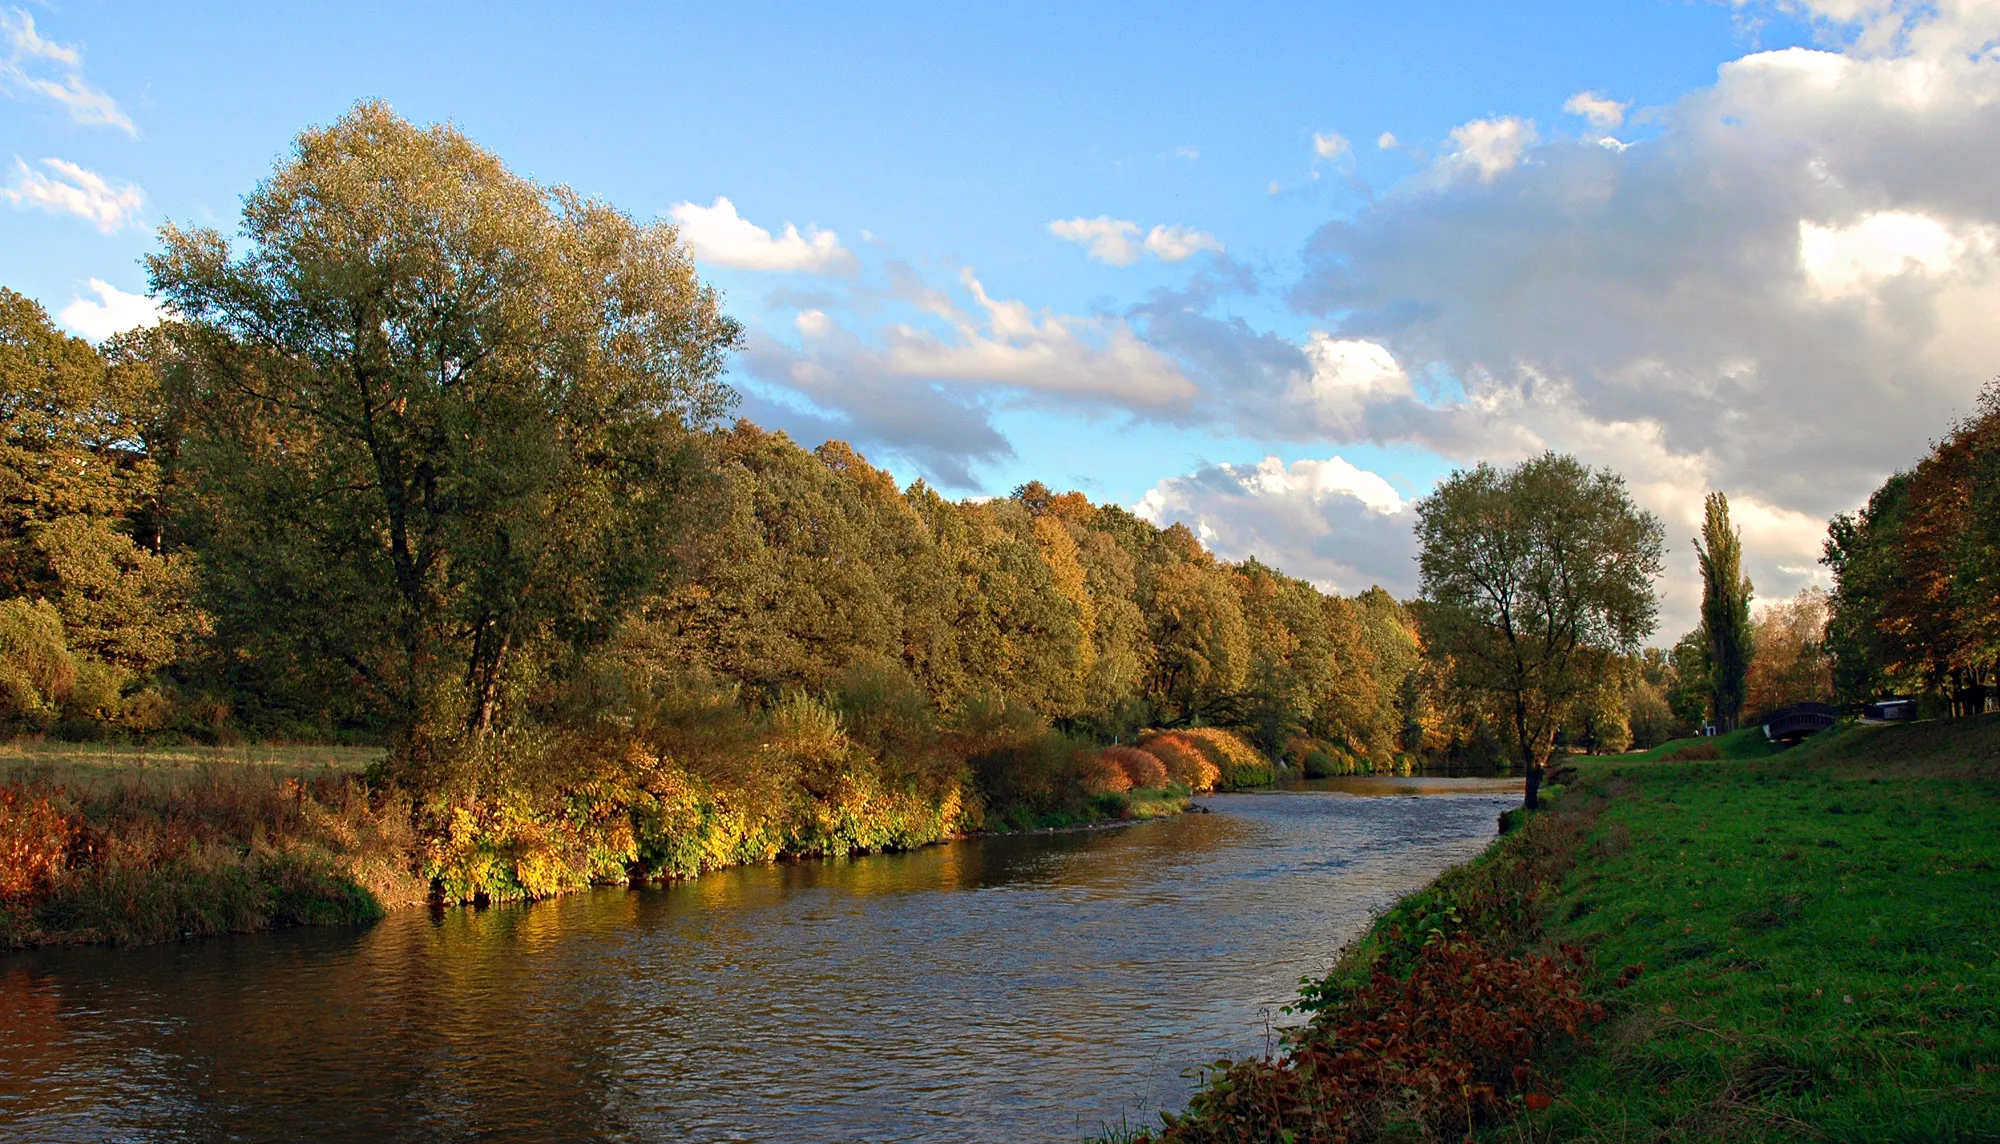 Photo showing: This image shows the river "Zwickauer Mulde" in Zwickau/Germany.